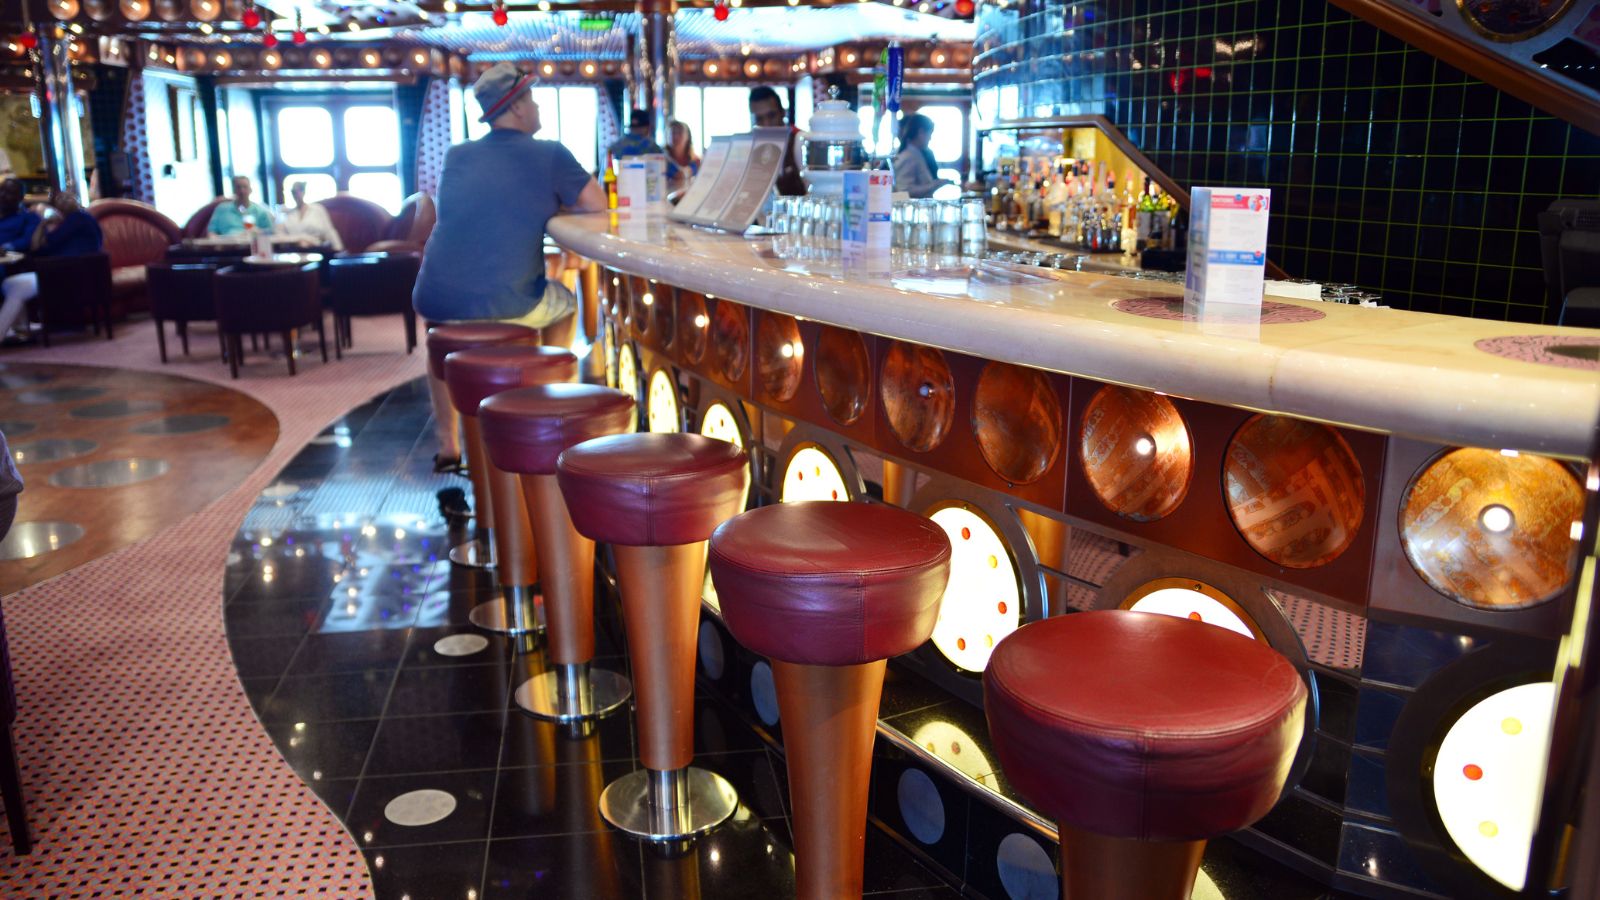 <p><span>Drinking on a ship can be expensive, so purchasing a drinks package can be a worthwhile investment if you like to drink a lot on your cruise vacation. Tot up how much you think you will consume on your cruise by researching the menus and determining if a </span><a href="https://cruisingkids.co.uk/royal-caribbeans-latest-drinks-package-guide-and-drink-menus/" rel="noopener"><span>drinks package</span></a><span> will be cheaper. </span></p> <p><span>Bring your non-alcoholic drinks onboard, such as water, soda, and juice. You can also bring your alcoholic beverages, but there are restrictions on the amount of alcohol you can carry on.</span></p>